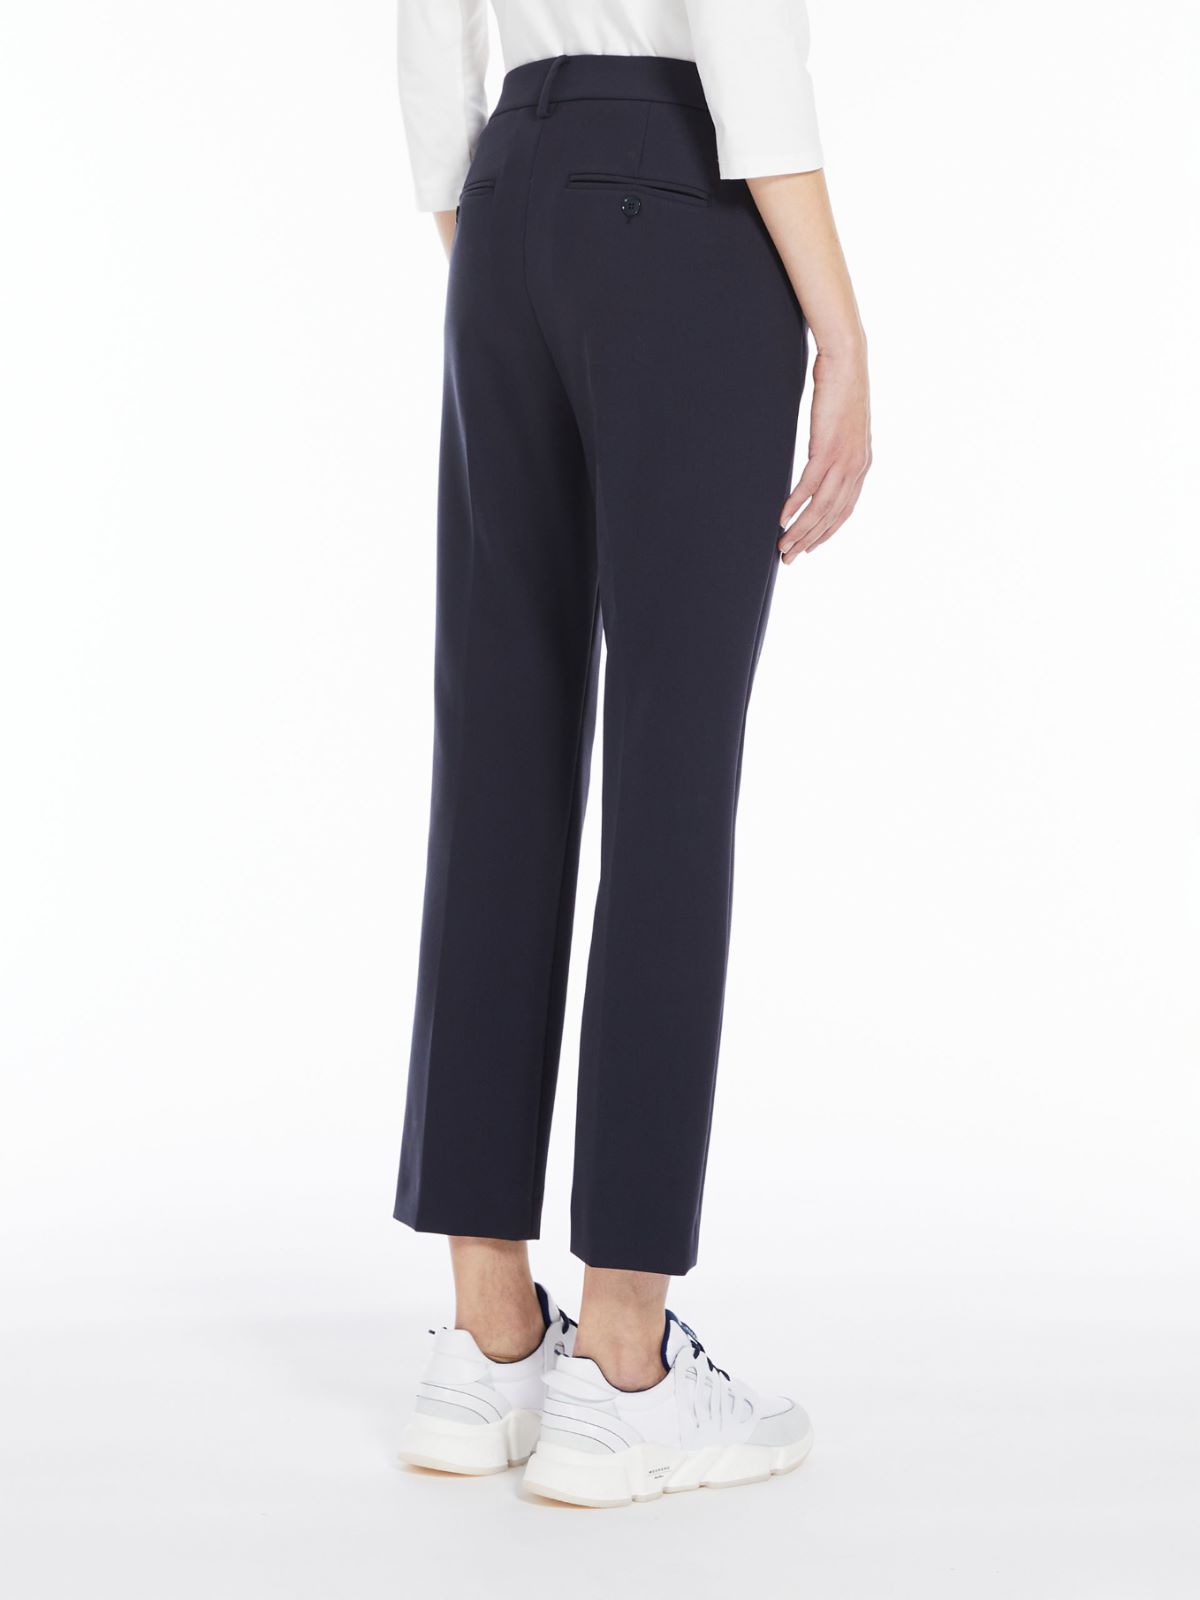 Canvas trousers - NAVY - Weekend Max Mara - 3